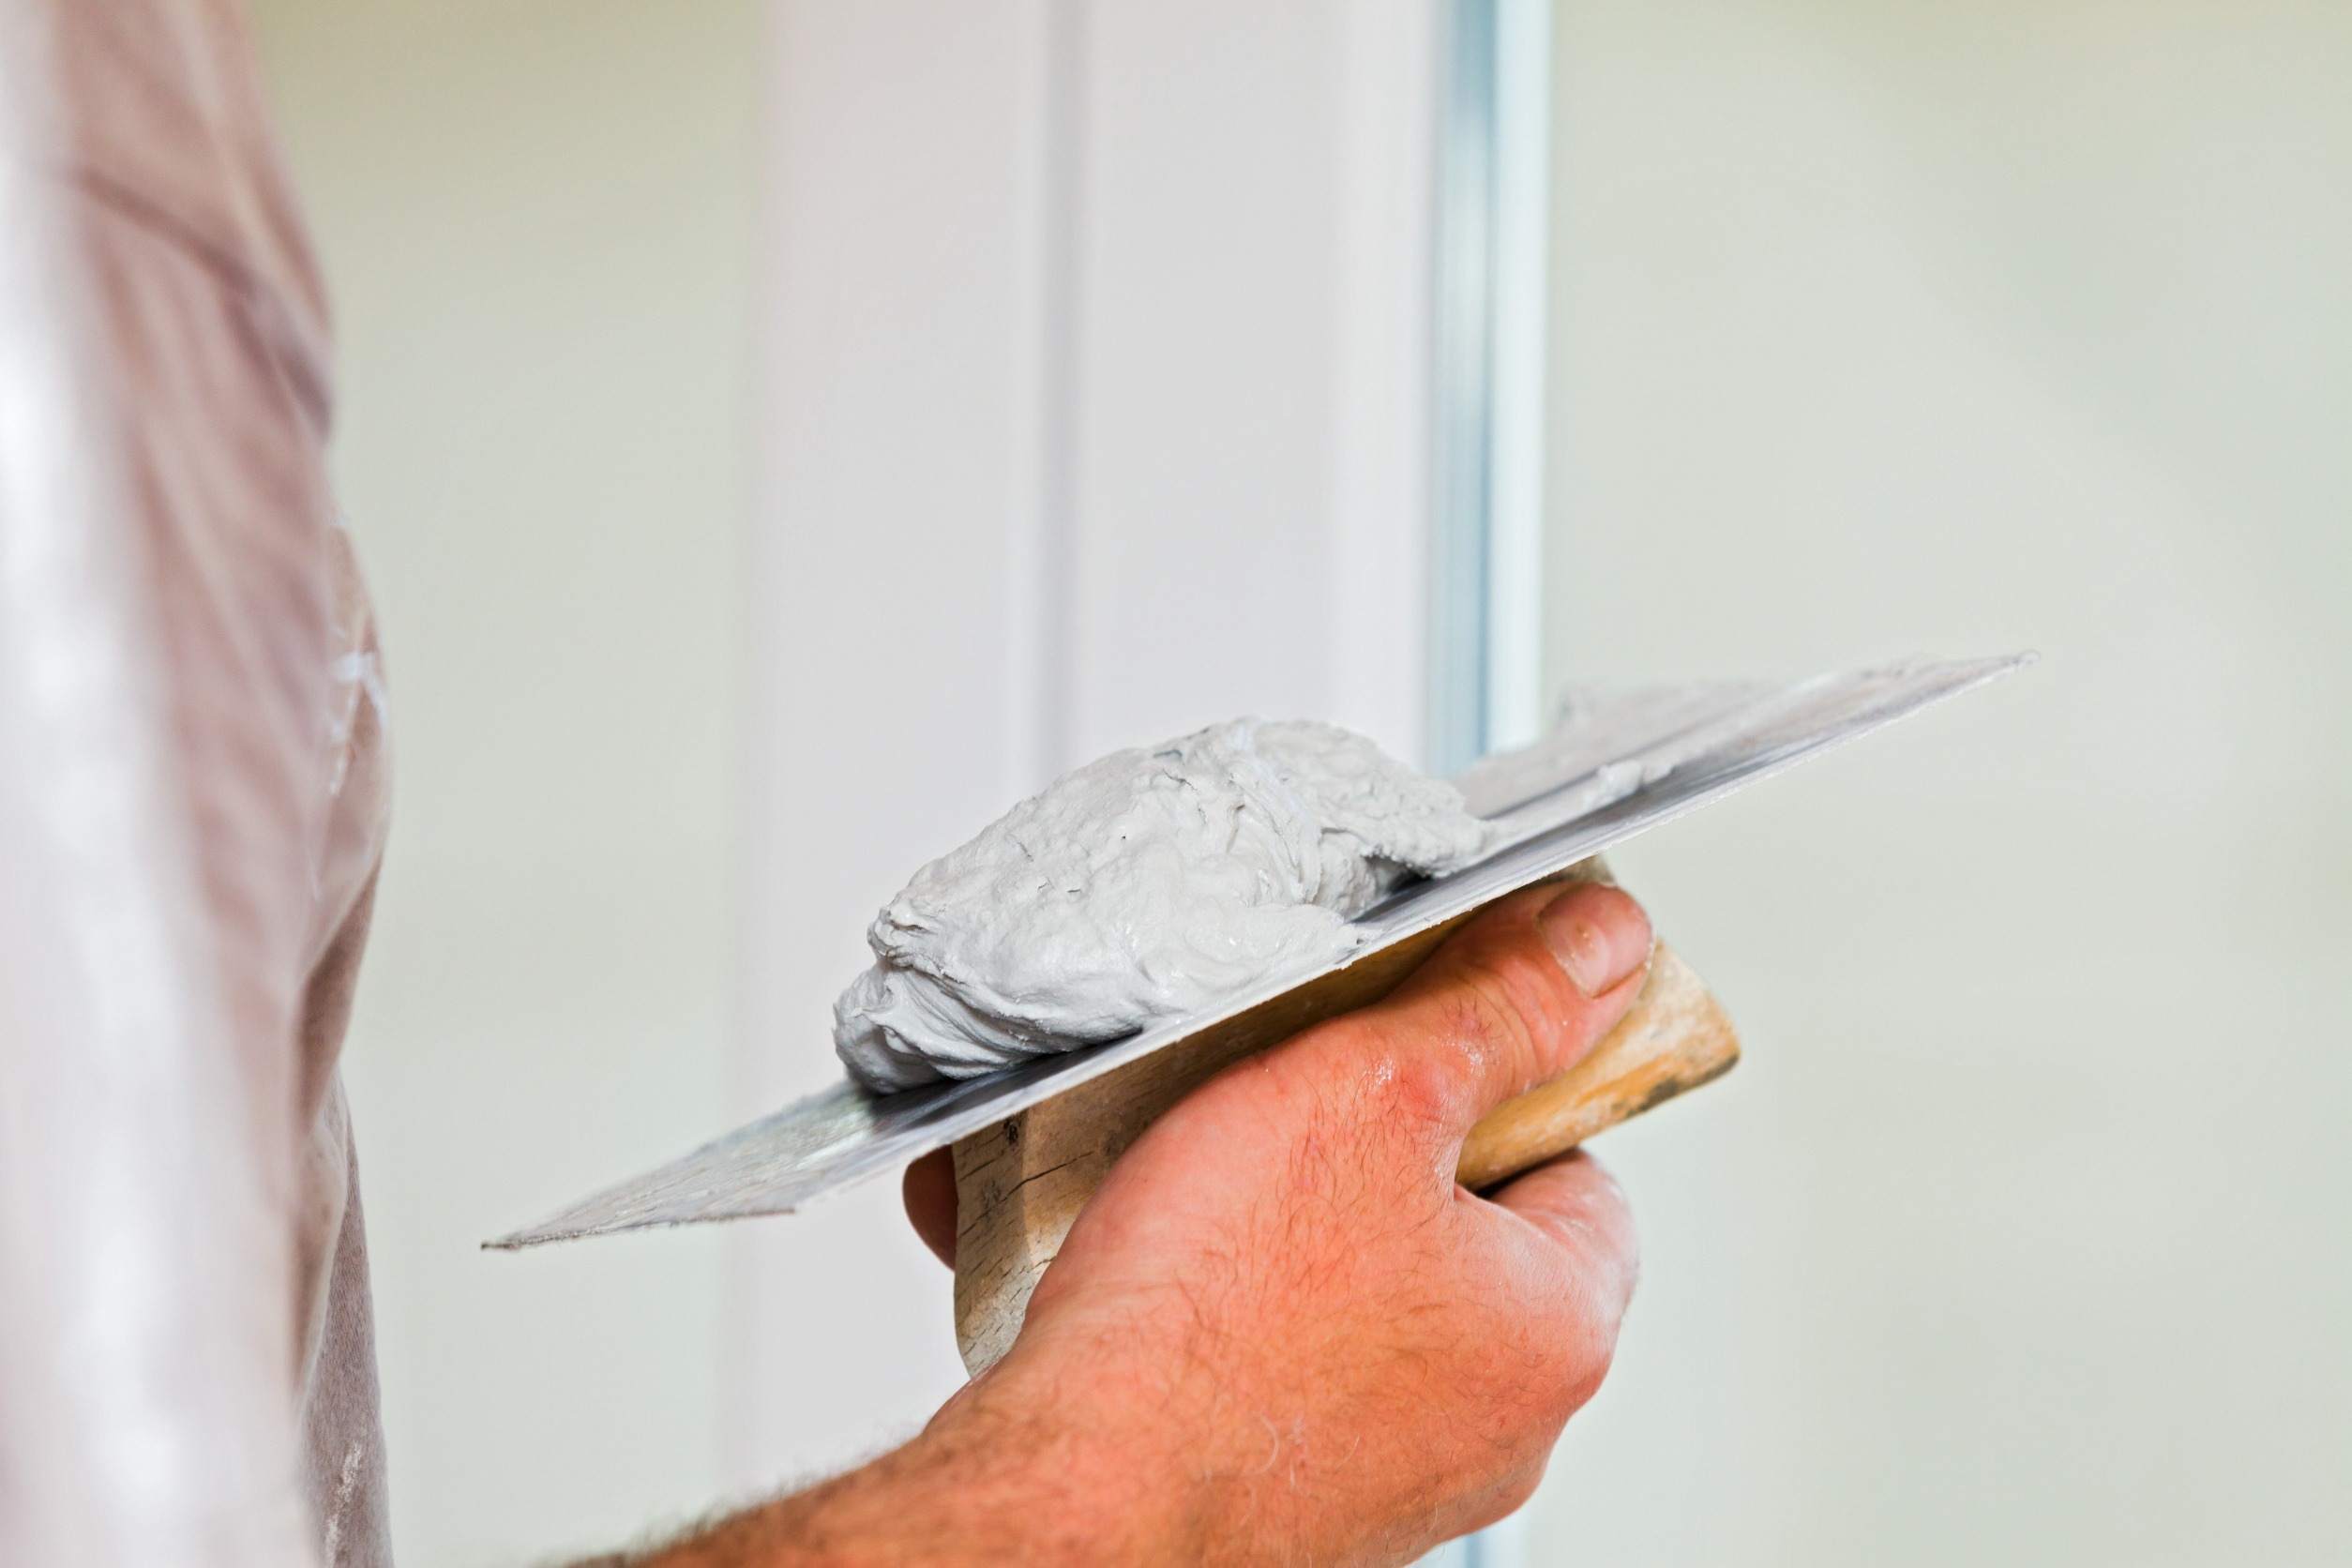 Handyman with drywall compound on a trowel